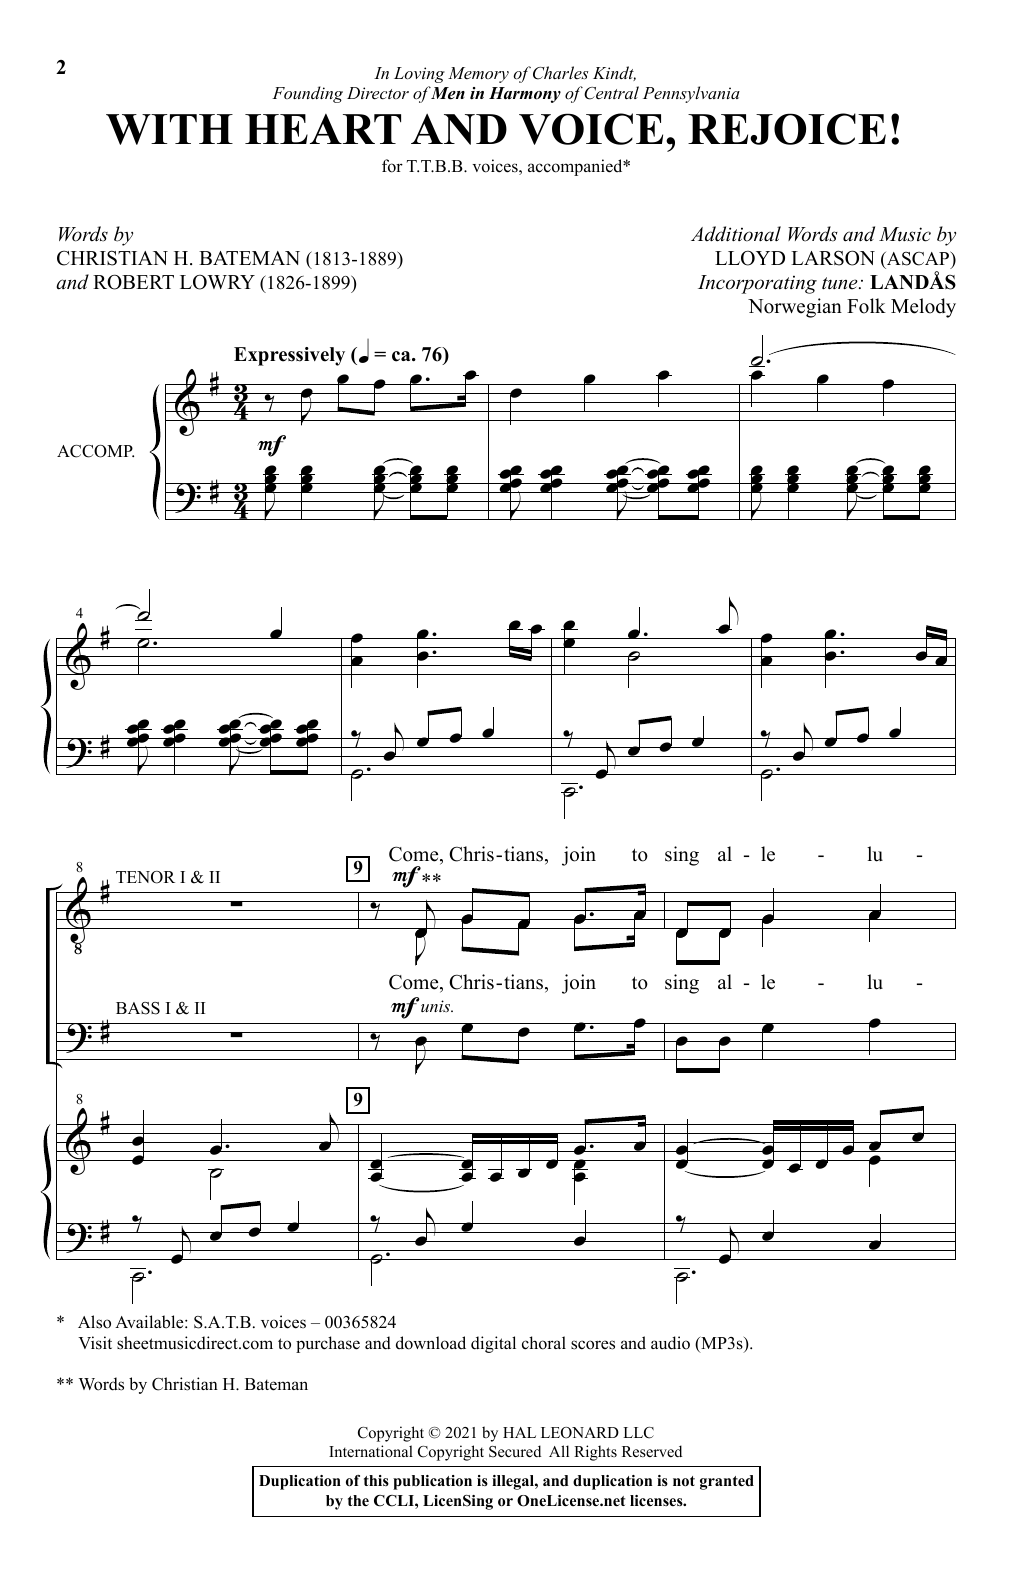 Download Lloyd Larson With Heart And Voice, Rejoice! Sheet Music